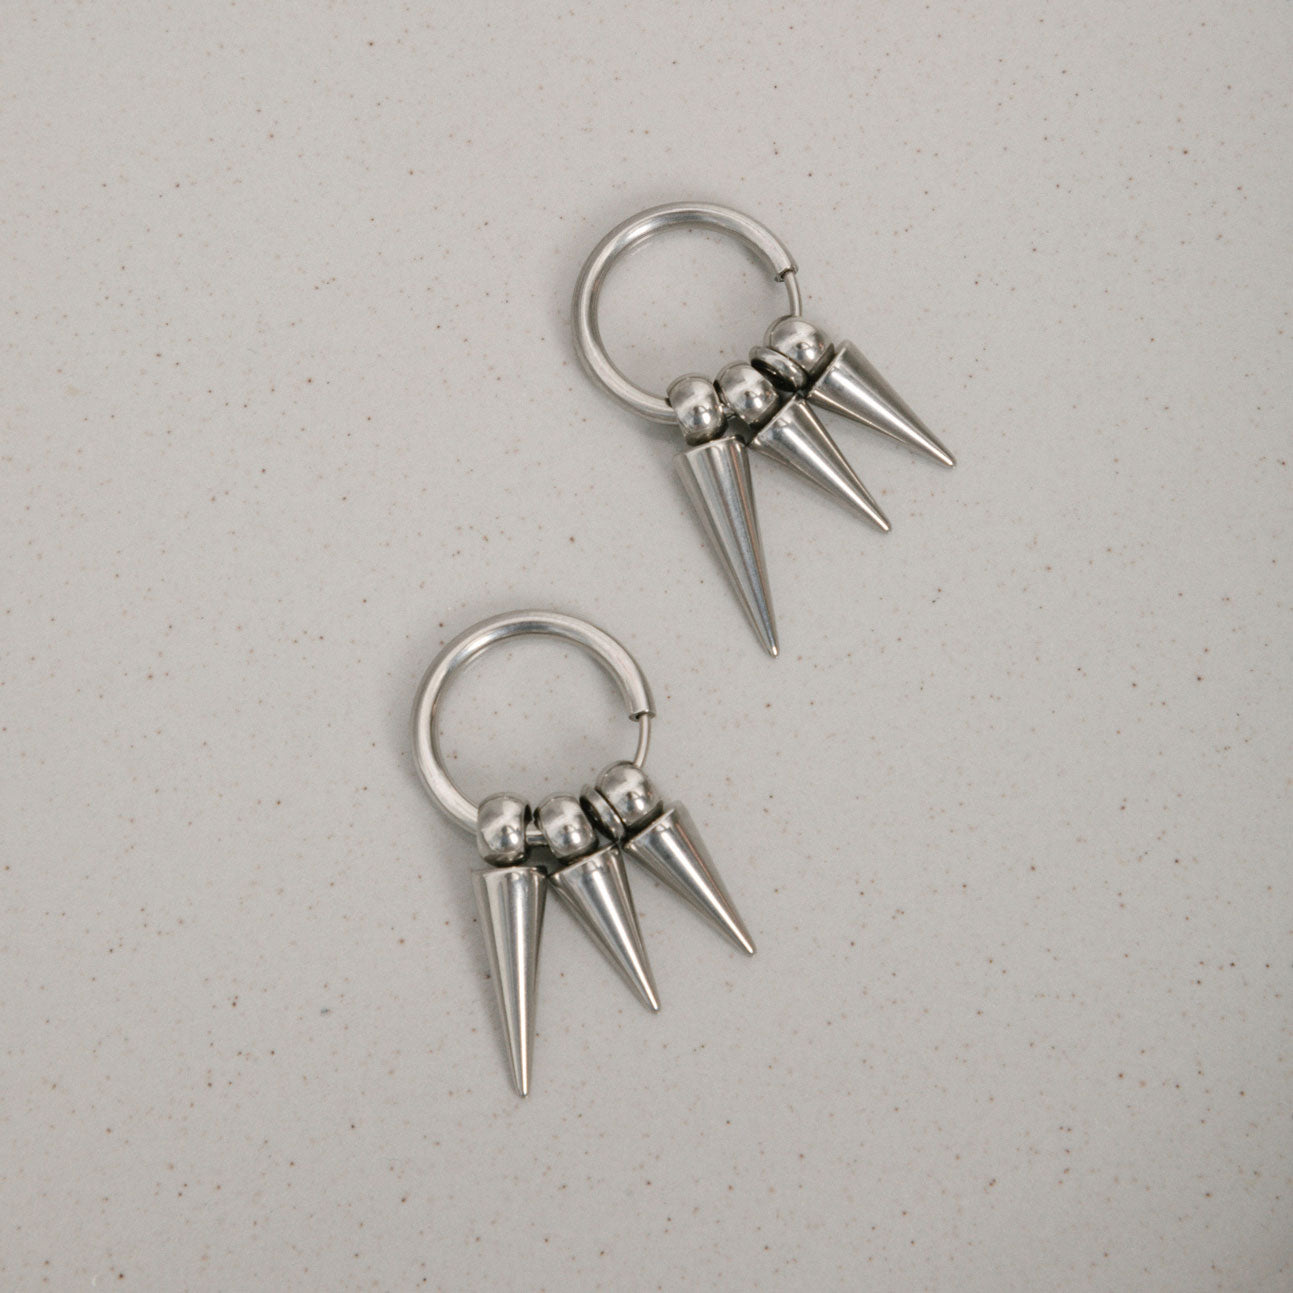 Image of the Triple Dangle Clip-On Earrings feature sliding spring closure, ideal for those with smaller or thinner ear lobes. Average comfortable wear duration estimated at 2 - 4 hours, with a secure hold. Earrings also have adjustable mechanism to ensure proper fit to ear thickness. Crafted with stainless steel, comes in one pair.